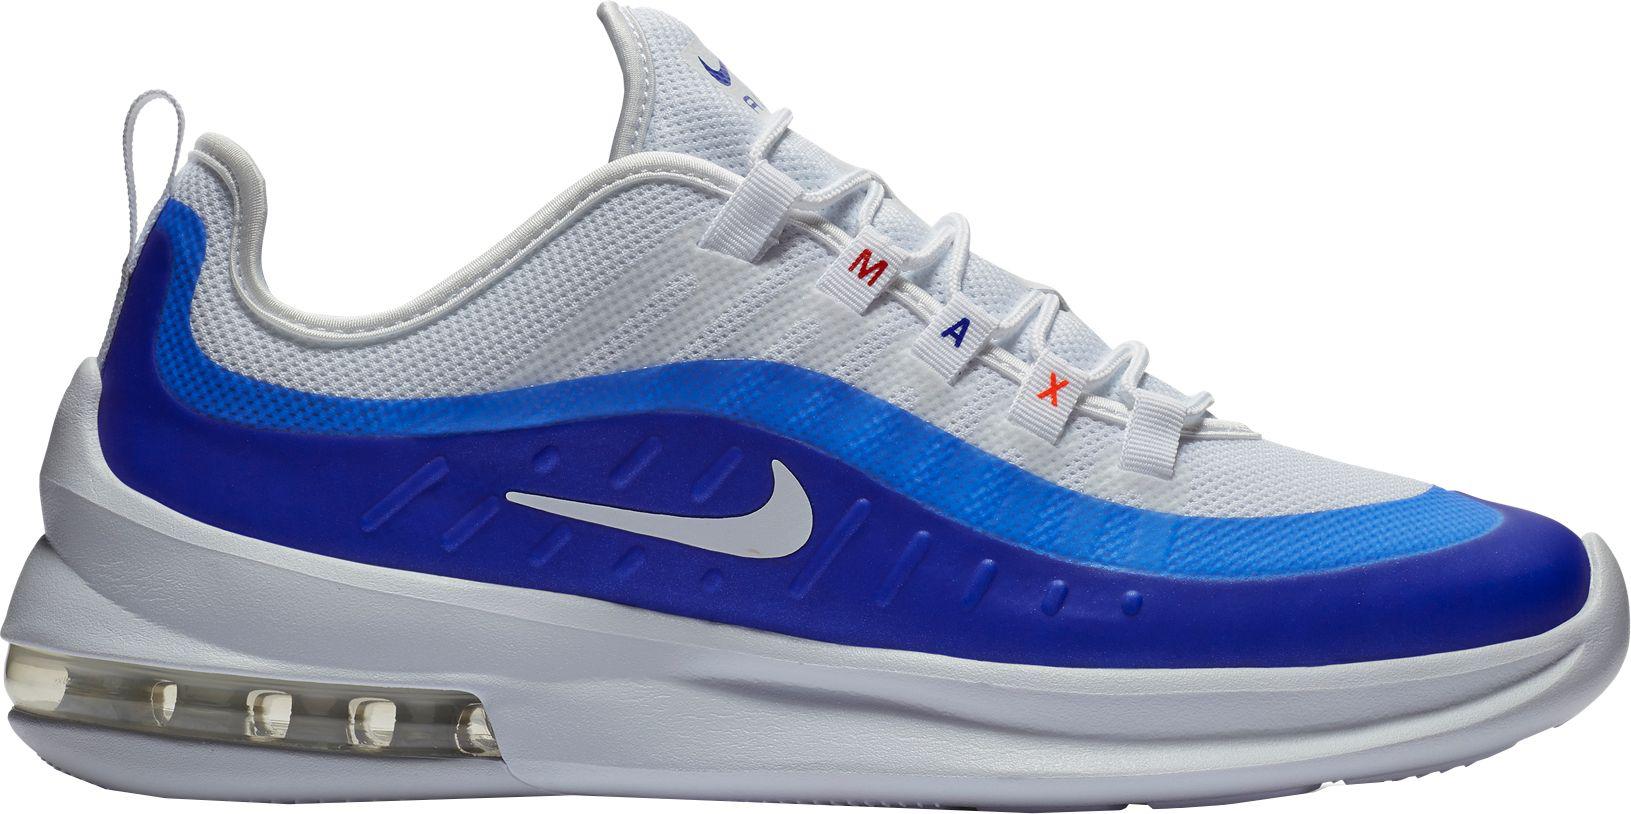 Nike Air Max Axis Shoes in White/Blue (Blue) for Men Lyst